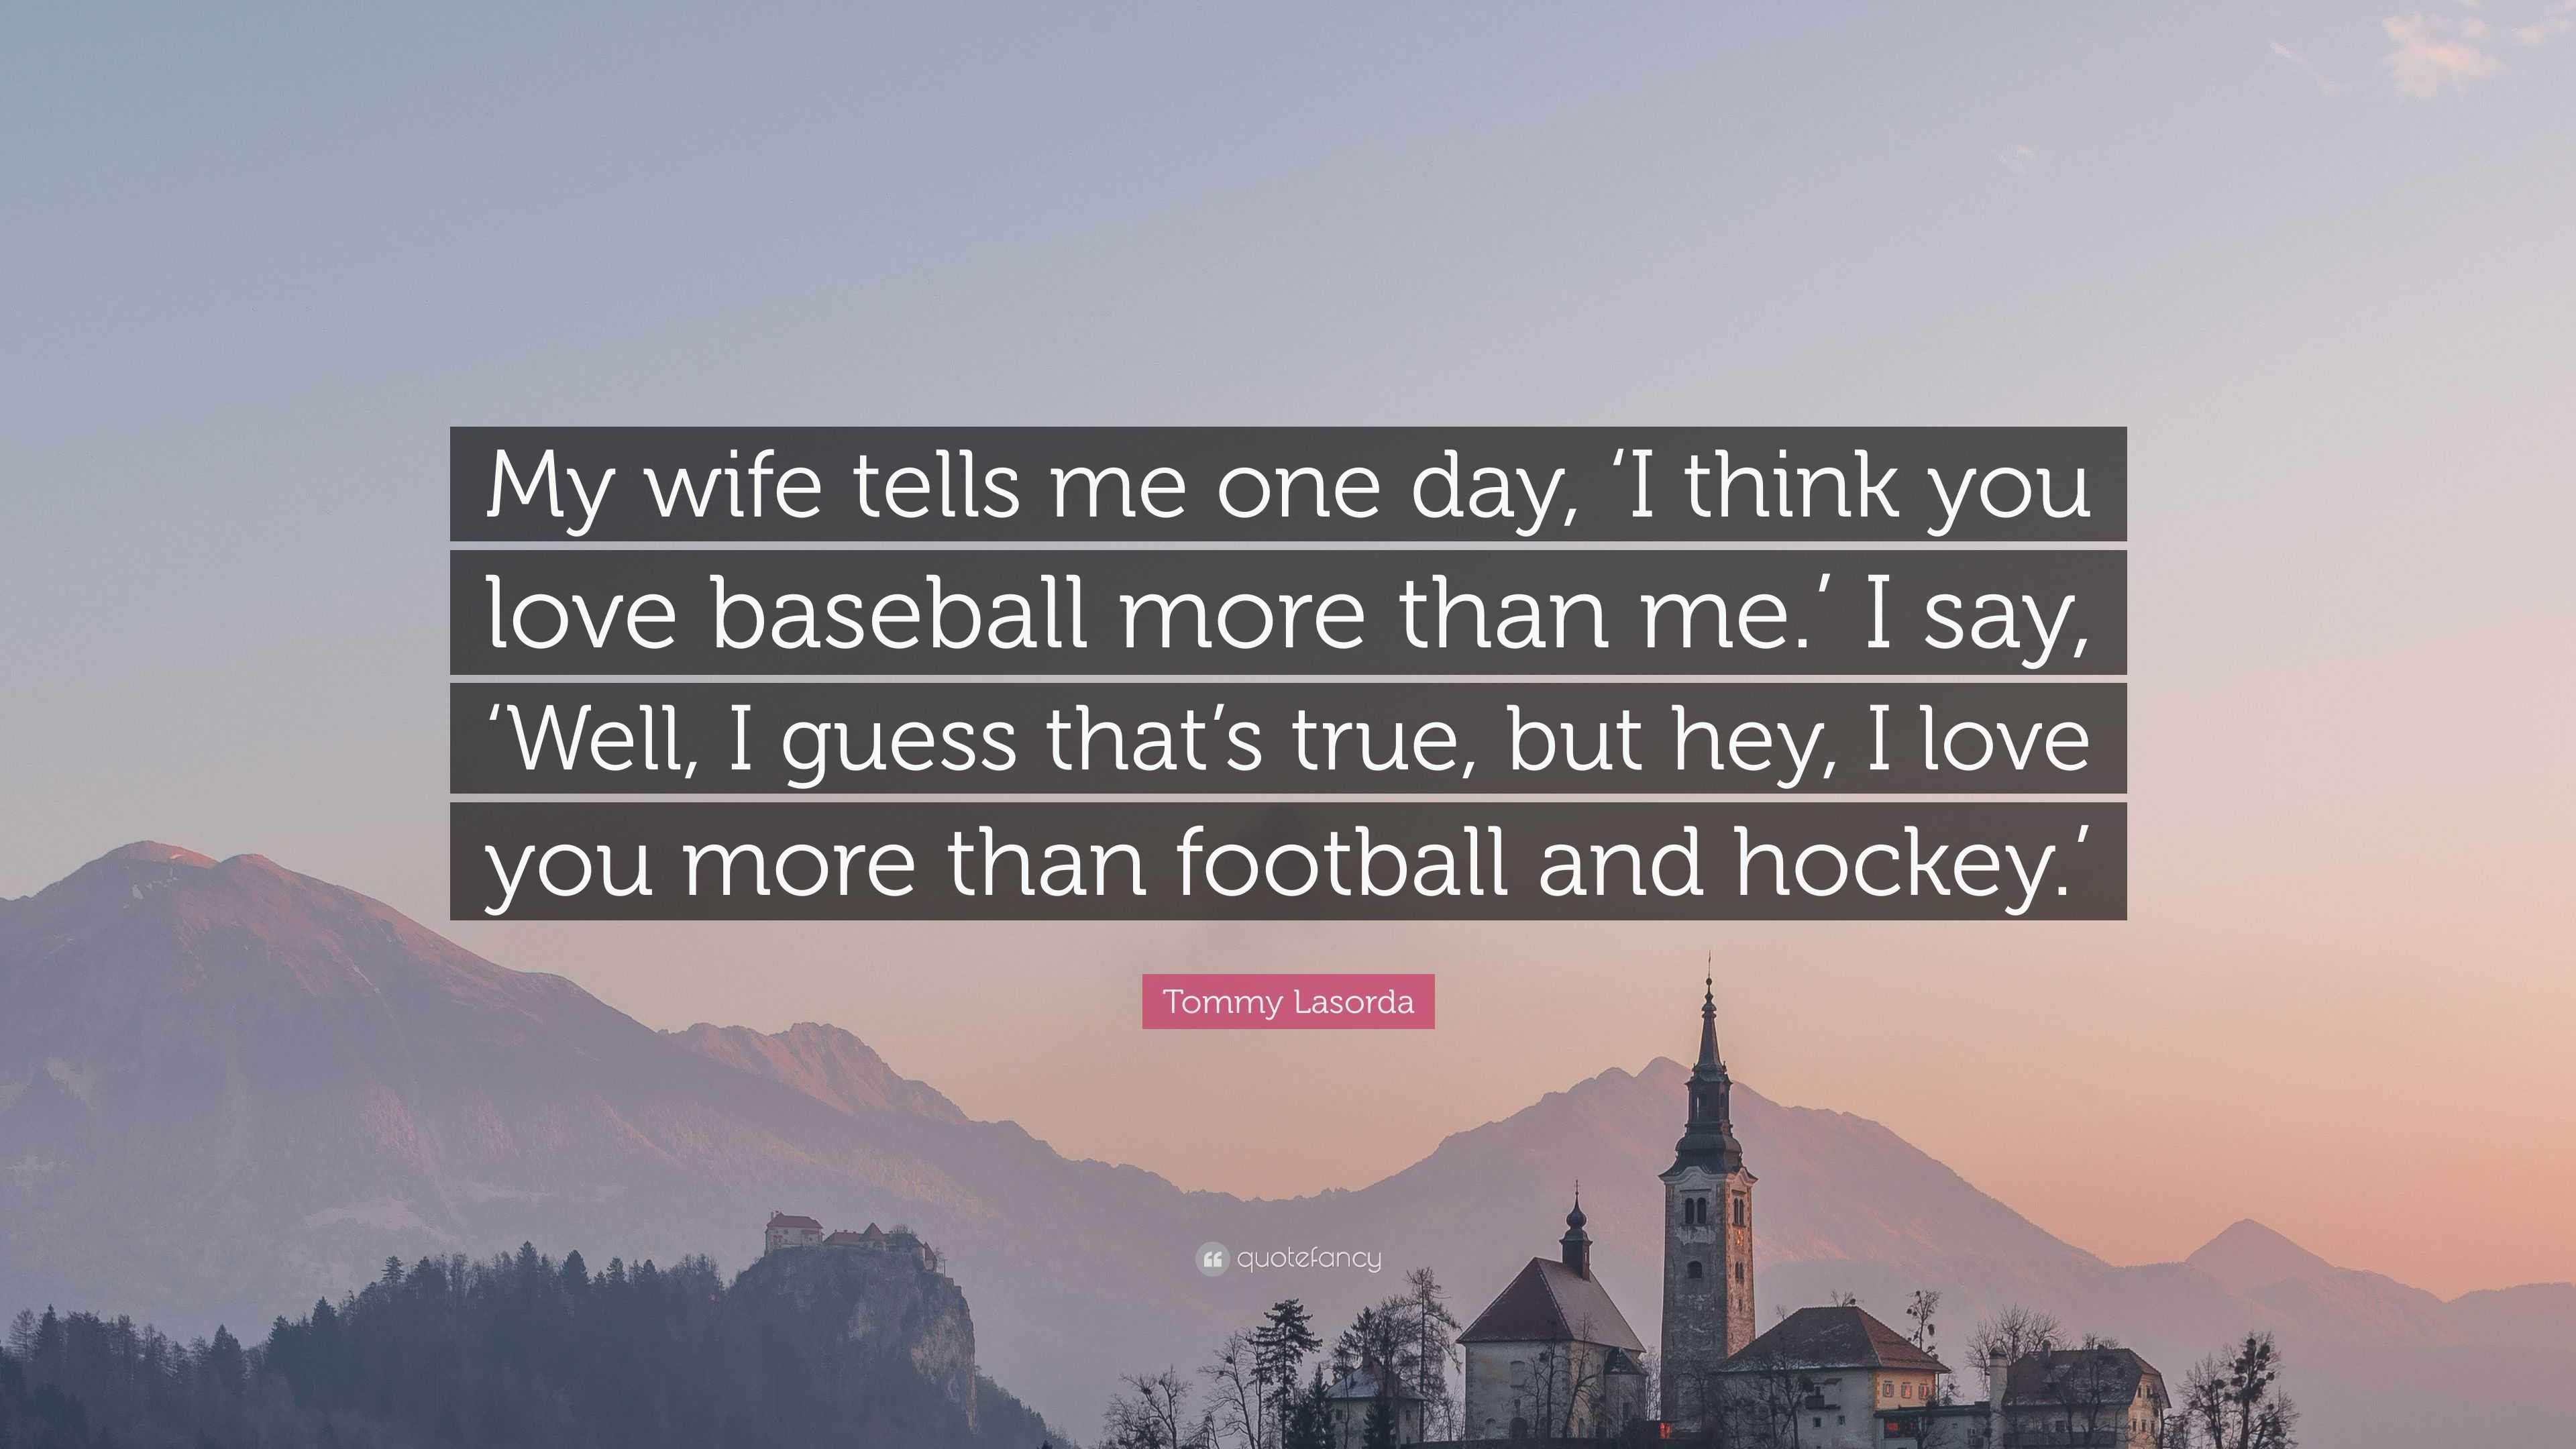 Tommy Lasorda Quote: “My wife tells me one day, 'I think you love